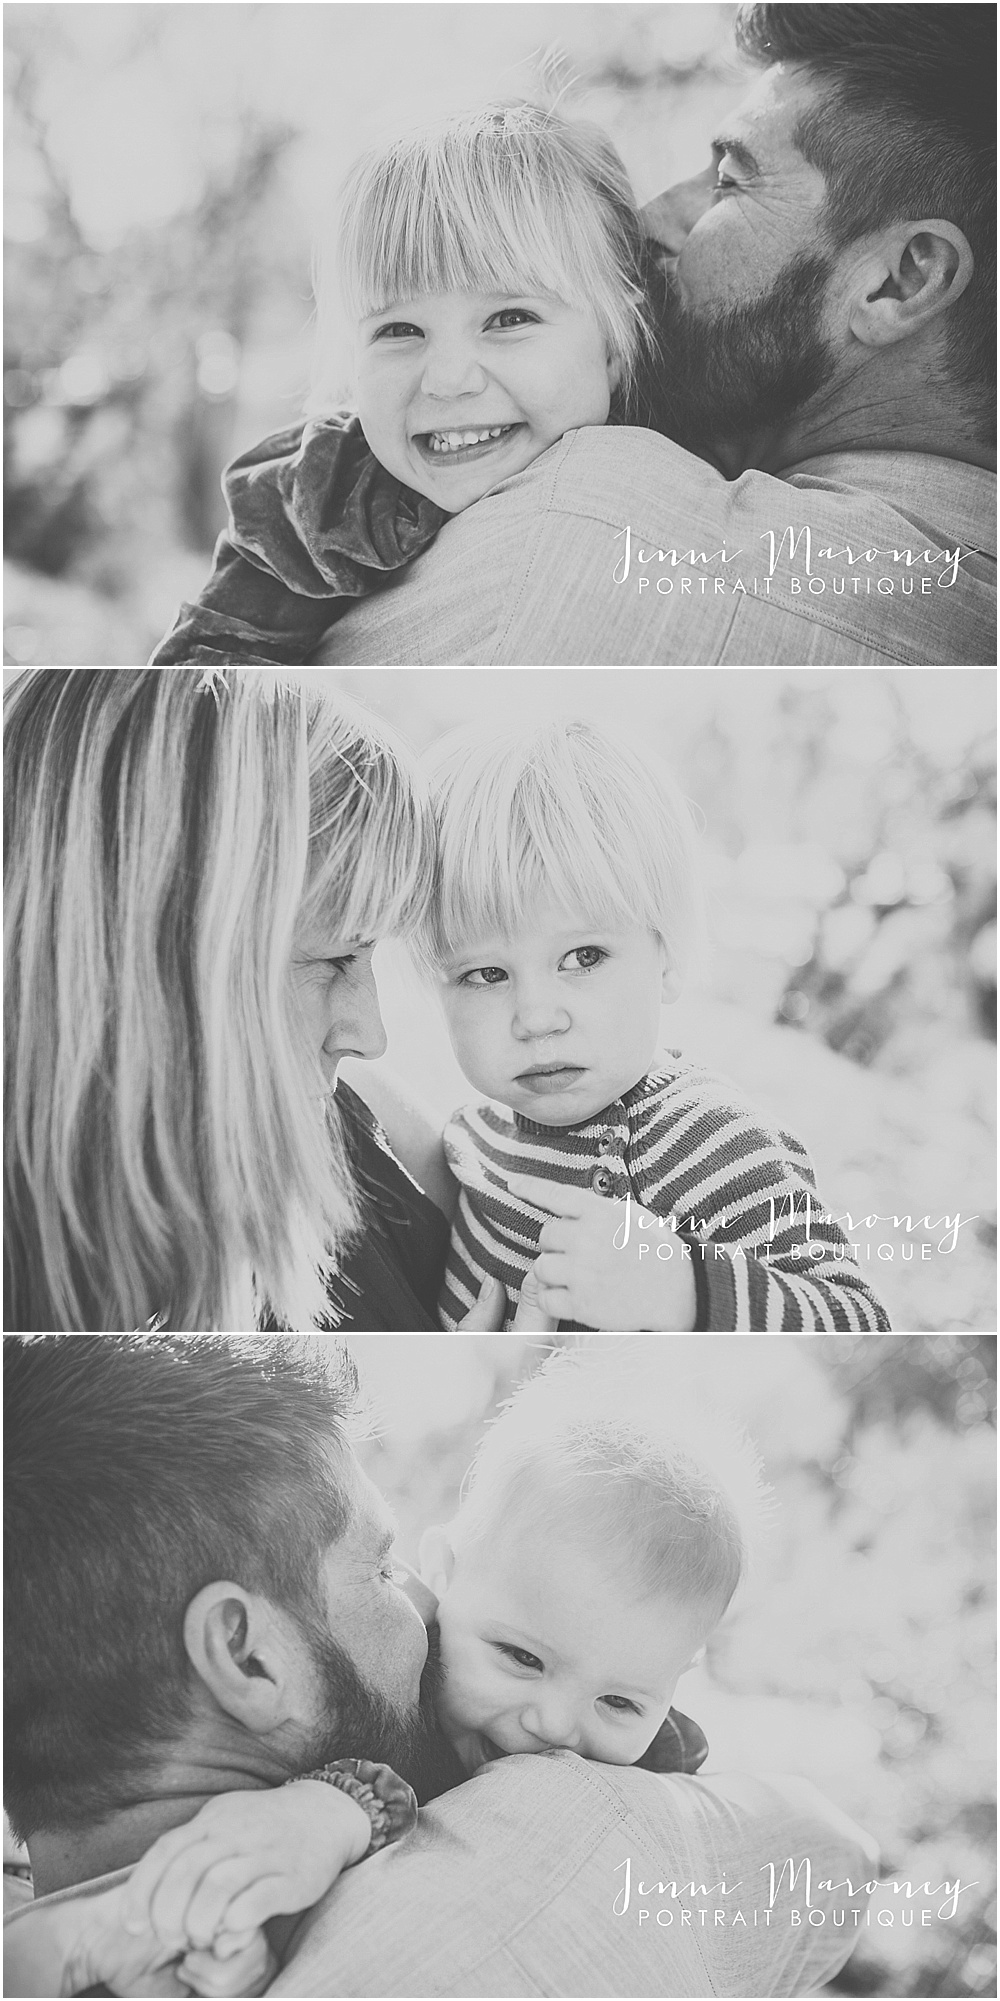 Boulder family photographer, Jenni Maroney Portrait Boutique specializes in natural and simple family photos in Boulder.